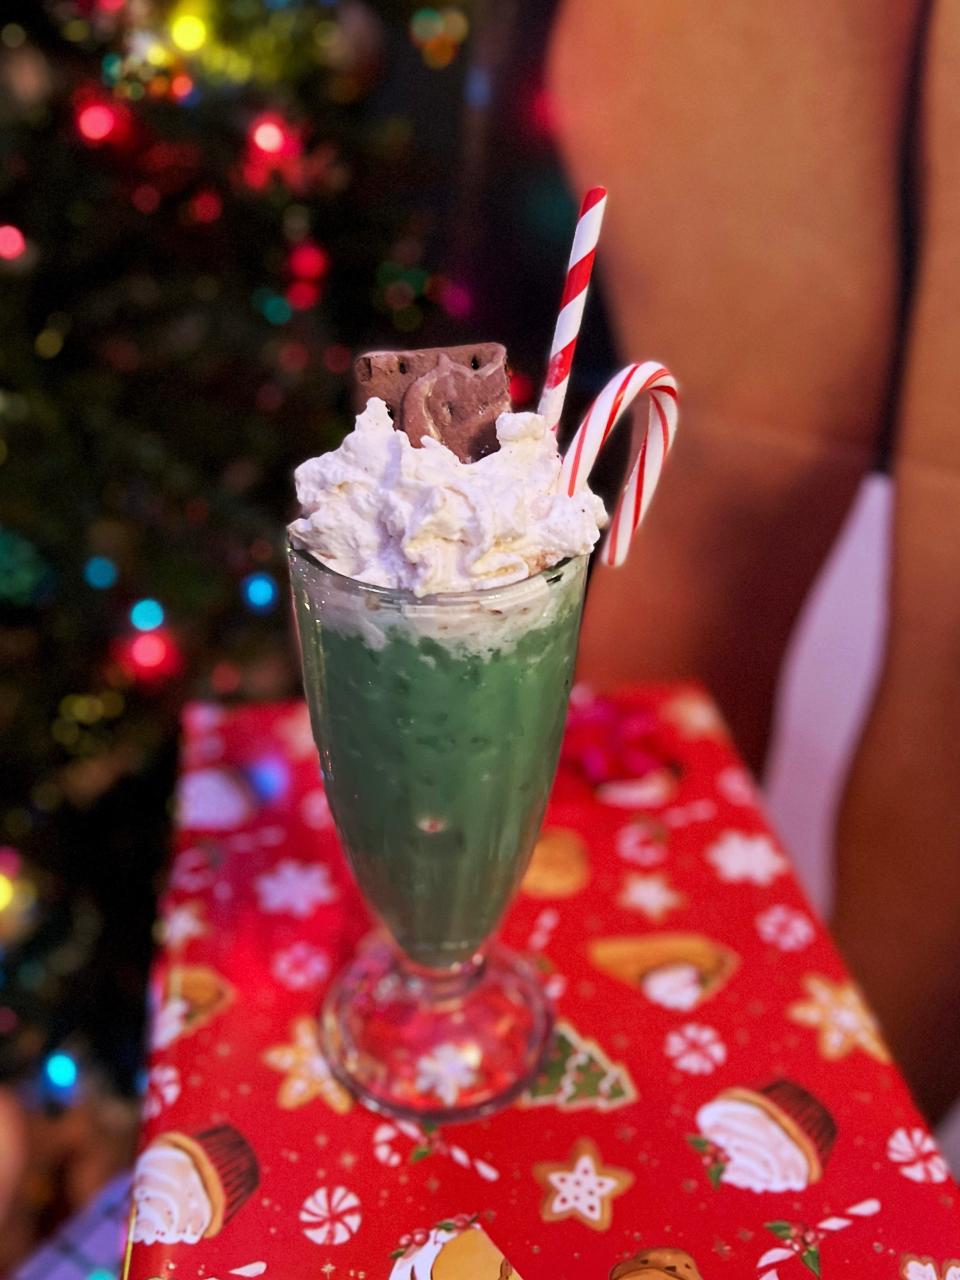 Lost Whale's "Elf" pop-up bar features themed cocktails such as "Not now Artic Puffin," with Central Standard North 40 brandy, Korbel brandy, Creme de Menthe, Creme de Cacao, house coconut blend, Bittercube orange bitters, house-made whipped cream, fudge Pop-Tart, and candy cane garnish.